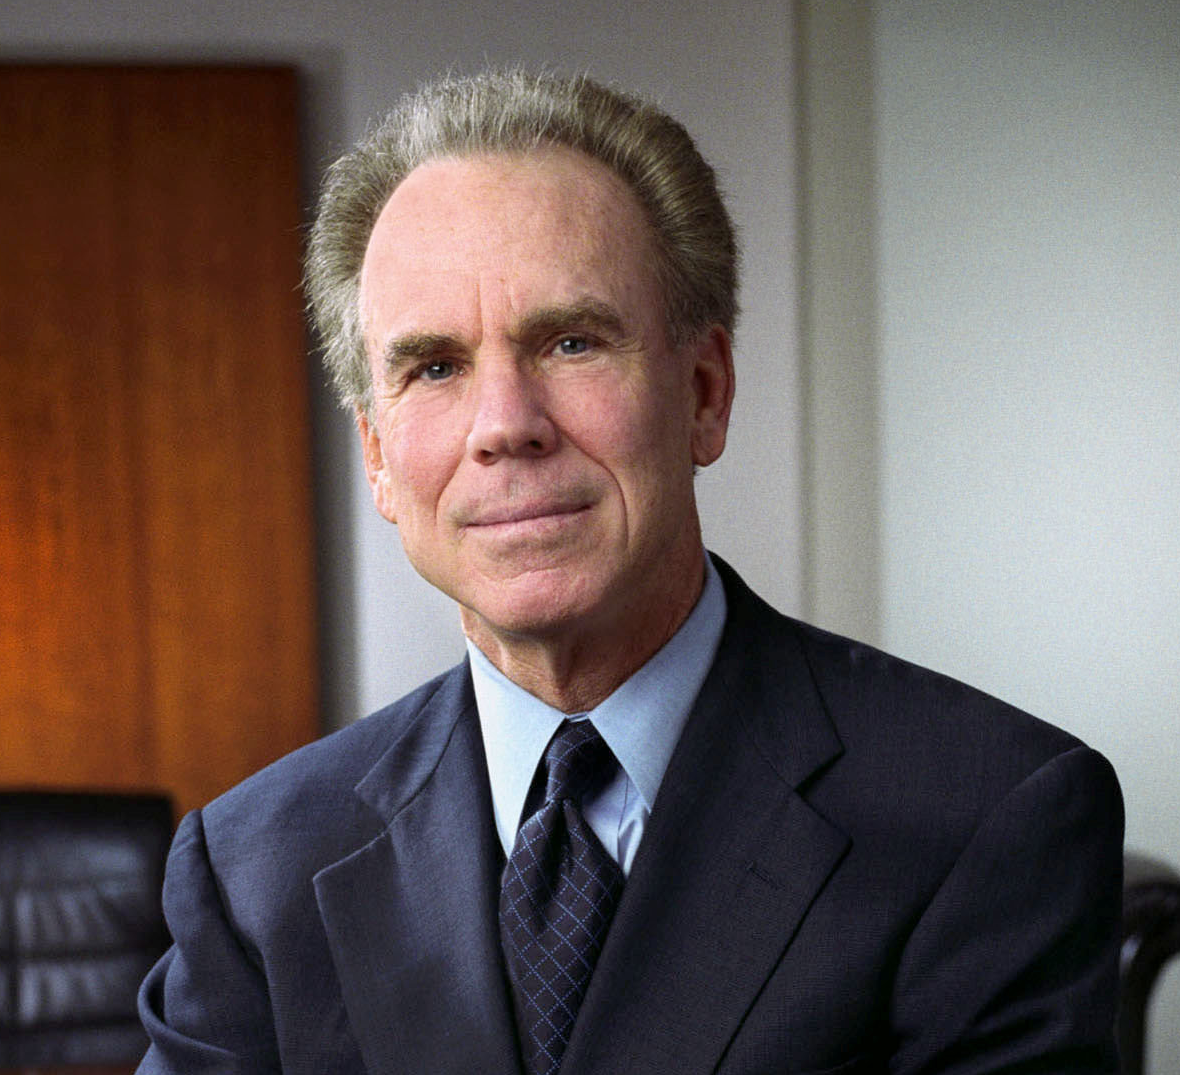 NFL Legend Roger Staubach to Keynote ADISA’s 2019 Annual Conference & Trade Show